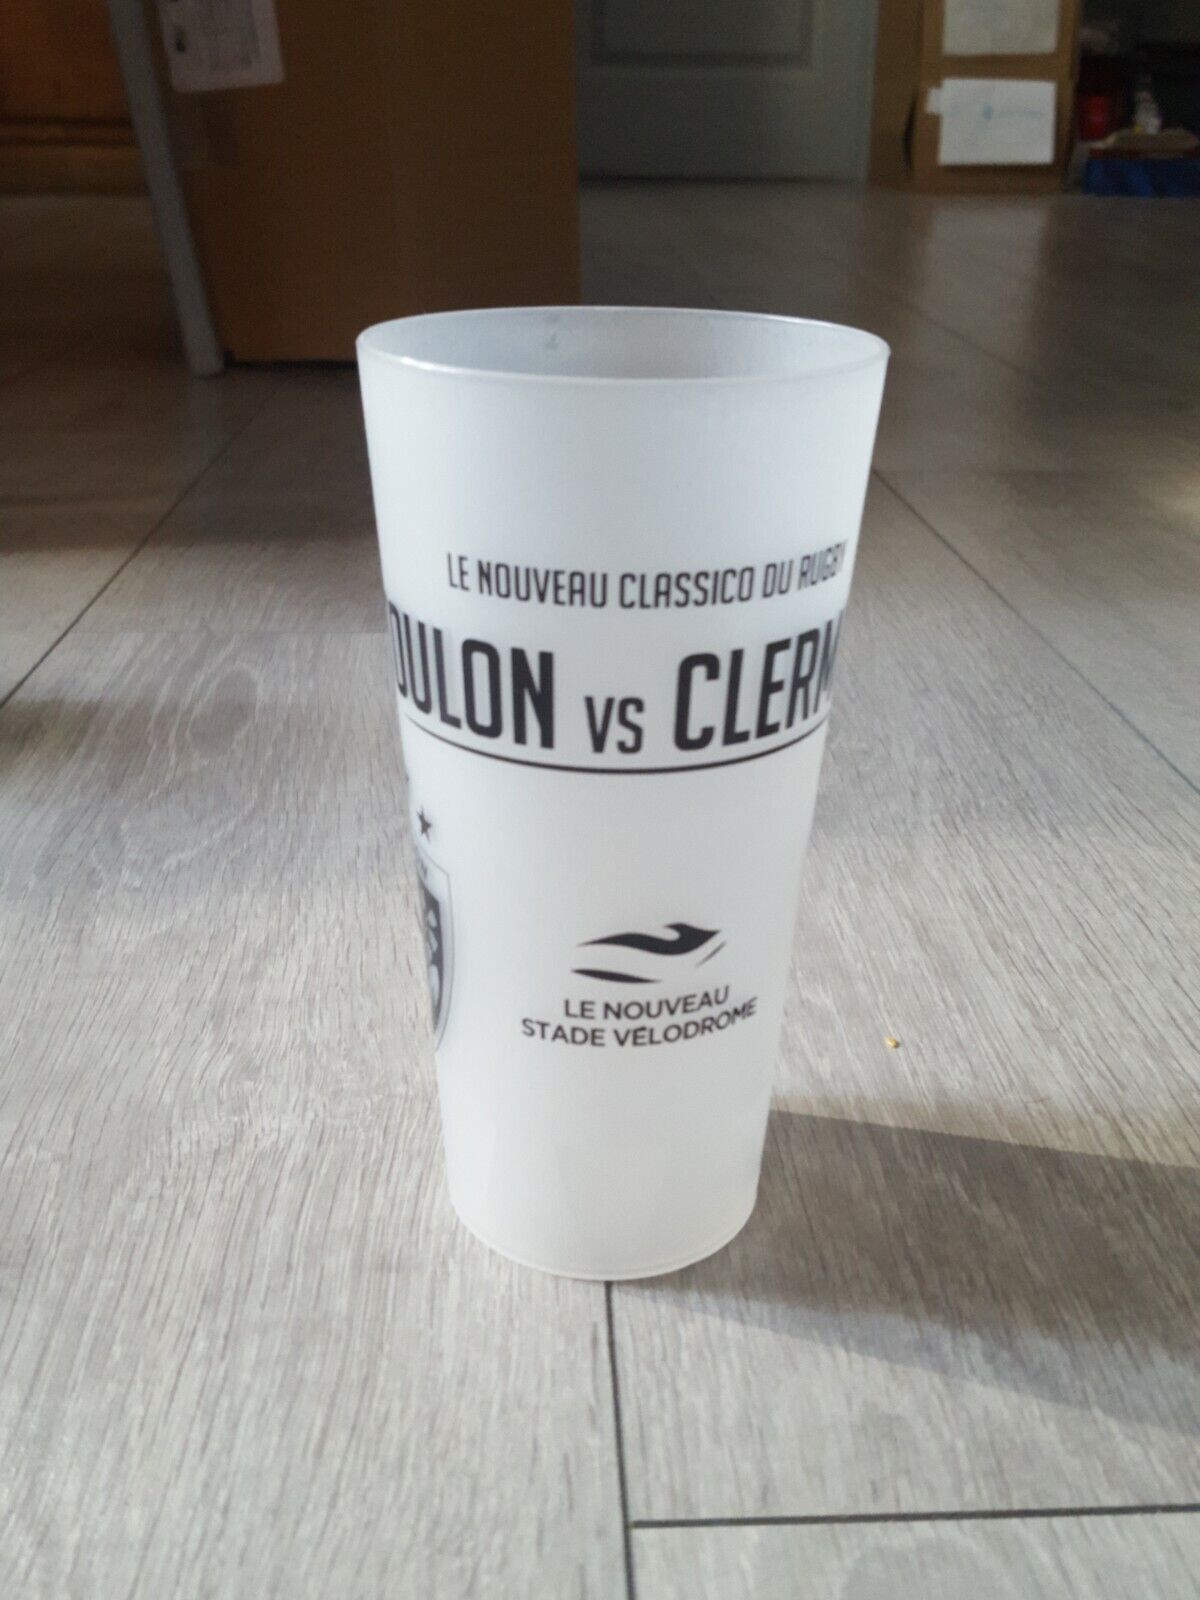 RCT TOULON RUGBY VS CLERMONT VELOD 50CL PLASTIC REUSABLE CUP GLASS #76